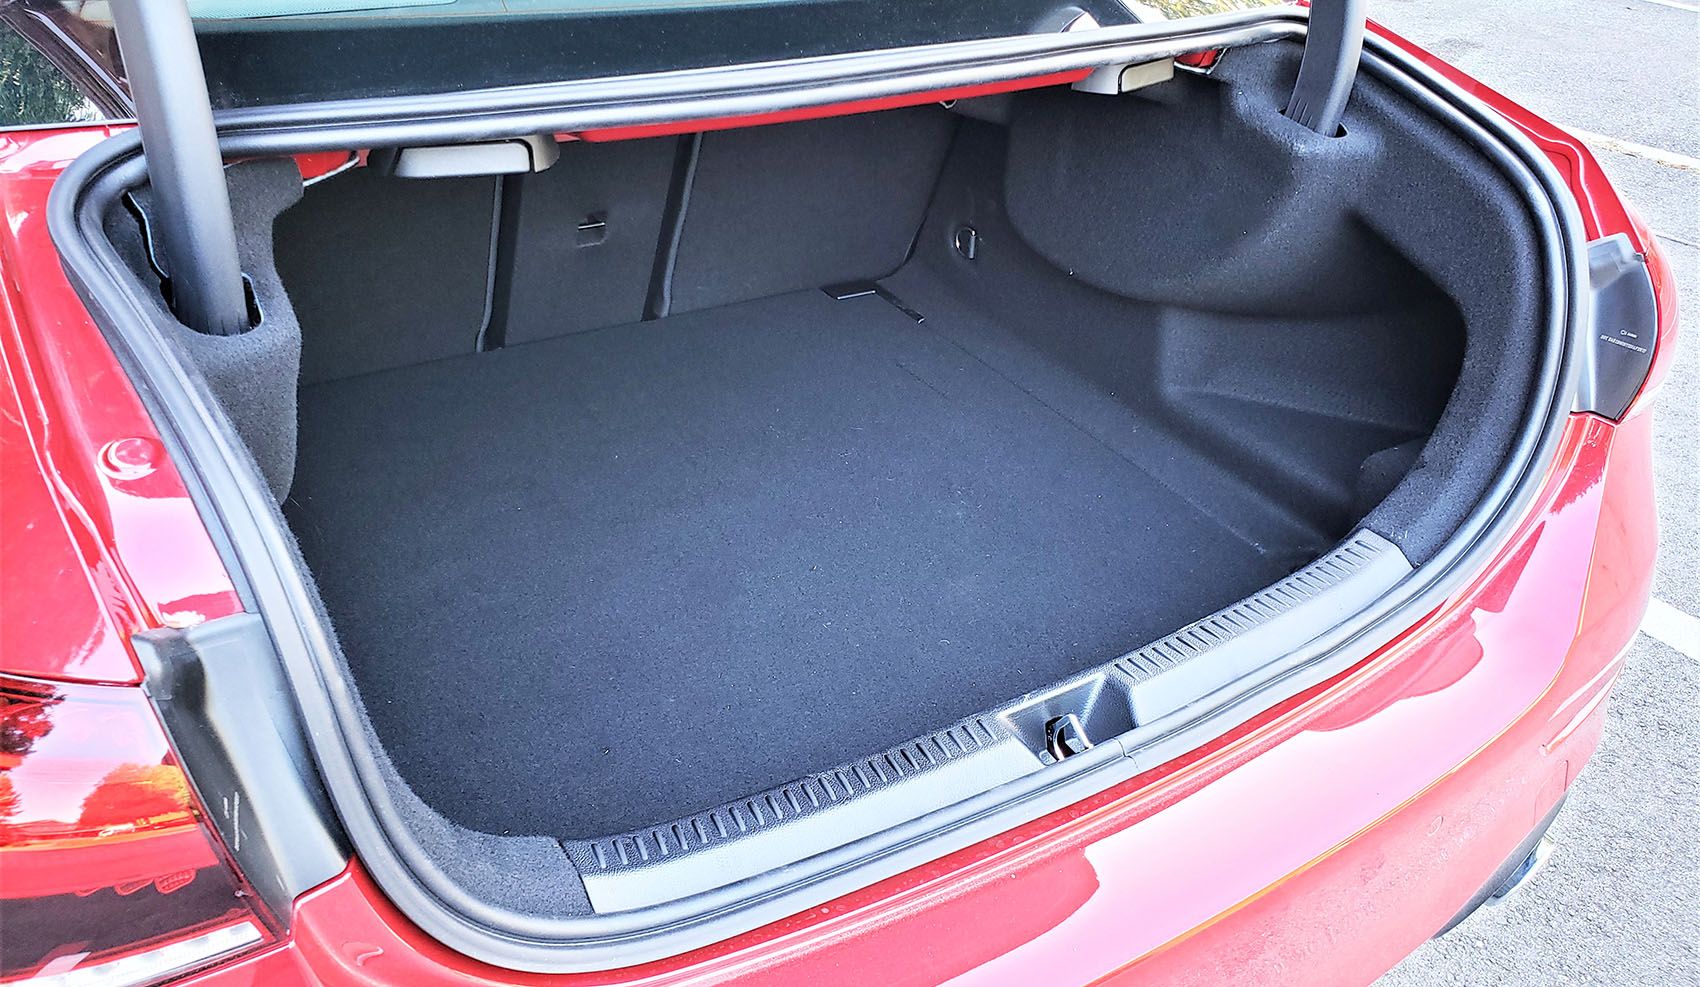 The A-Series Sedan has one of the smallest trunks in its class.